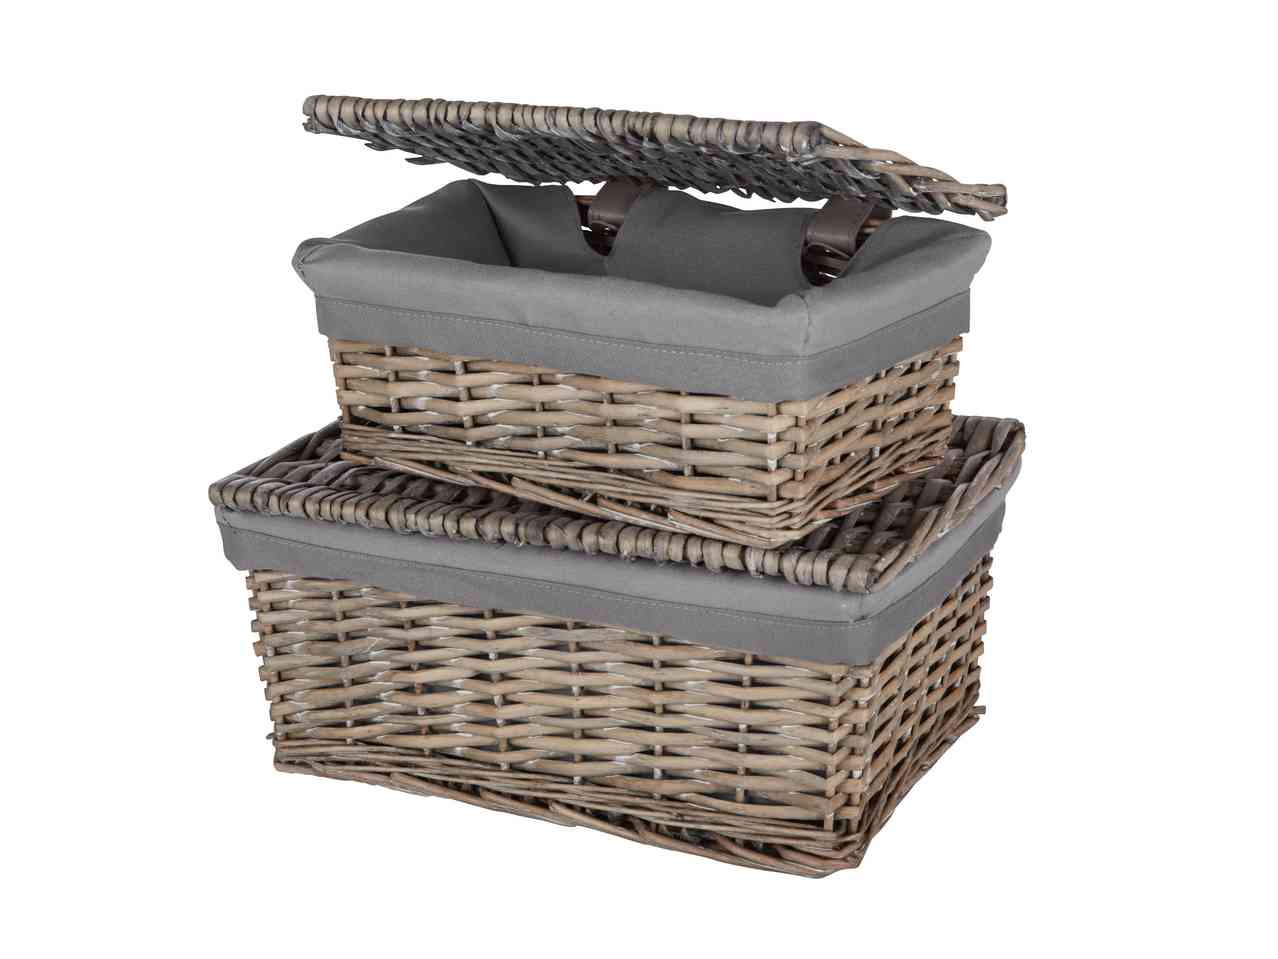 Wicker Basket with Fabric Lining